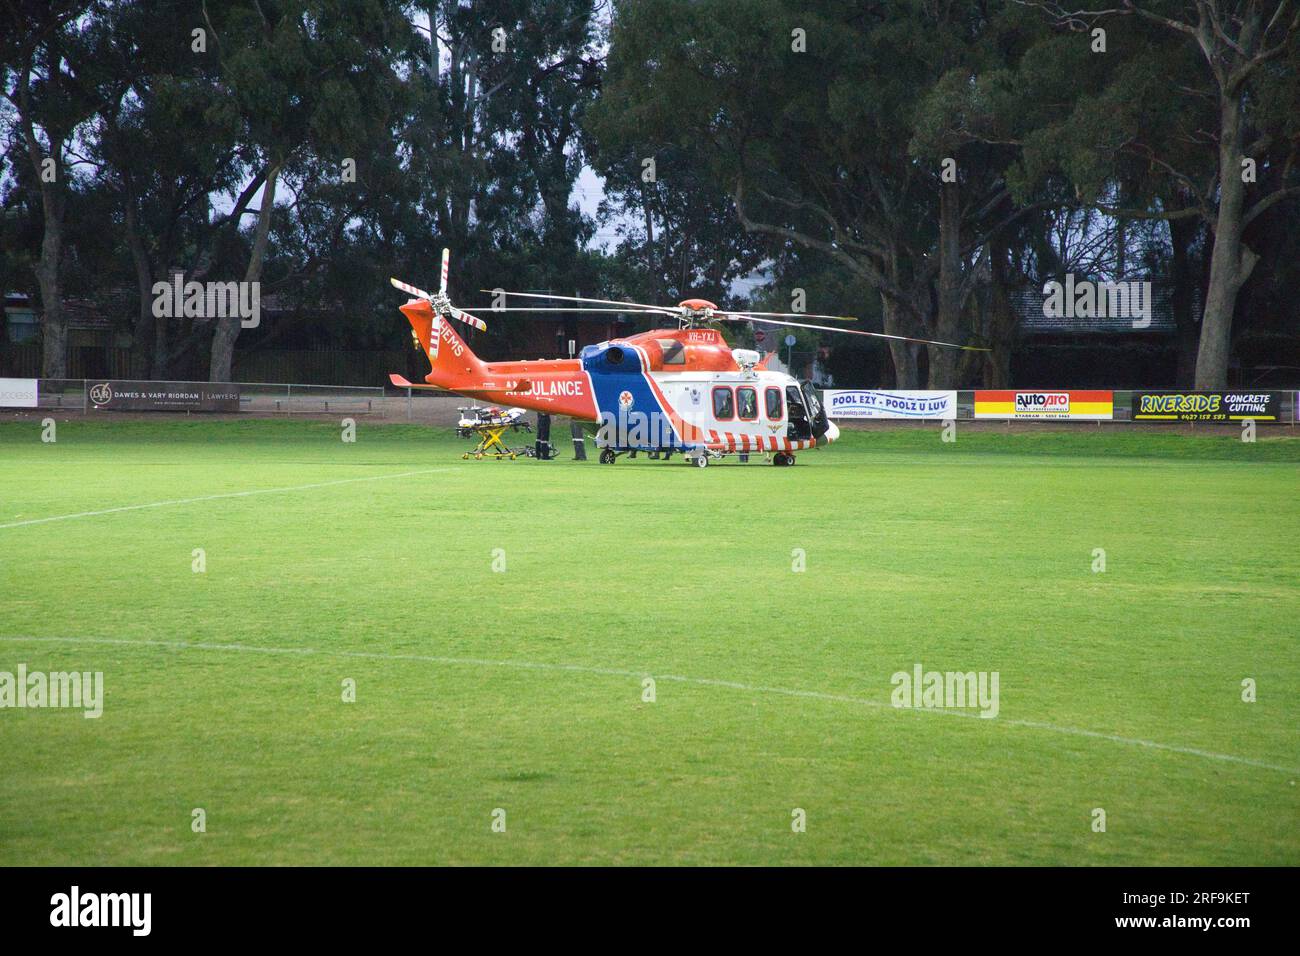 A stationary Air Ambulance Helicpoter Victoria Australia on a bright artificially lit football field in a Country Town at Sunset. Stock Photo